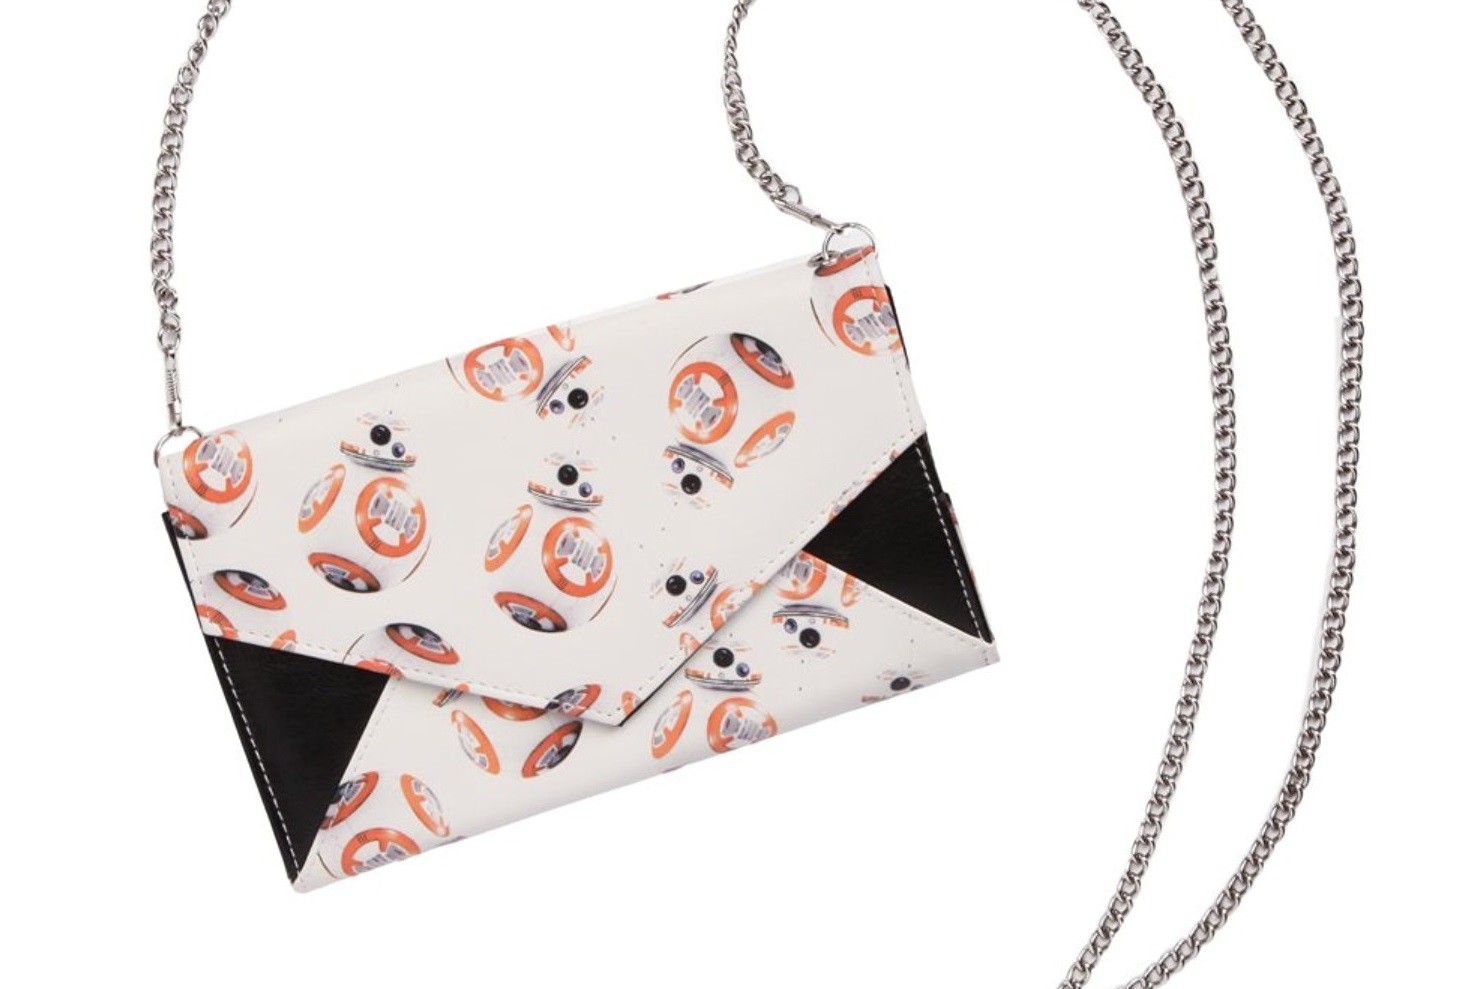 BB-8 envelope clutch with shoulder chain